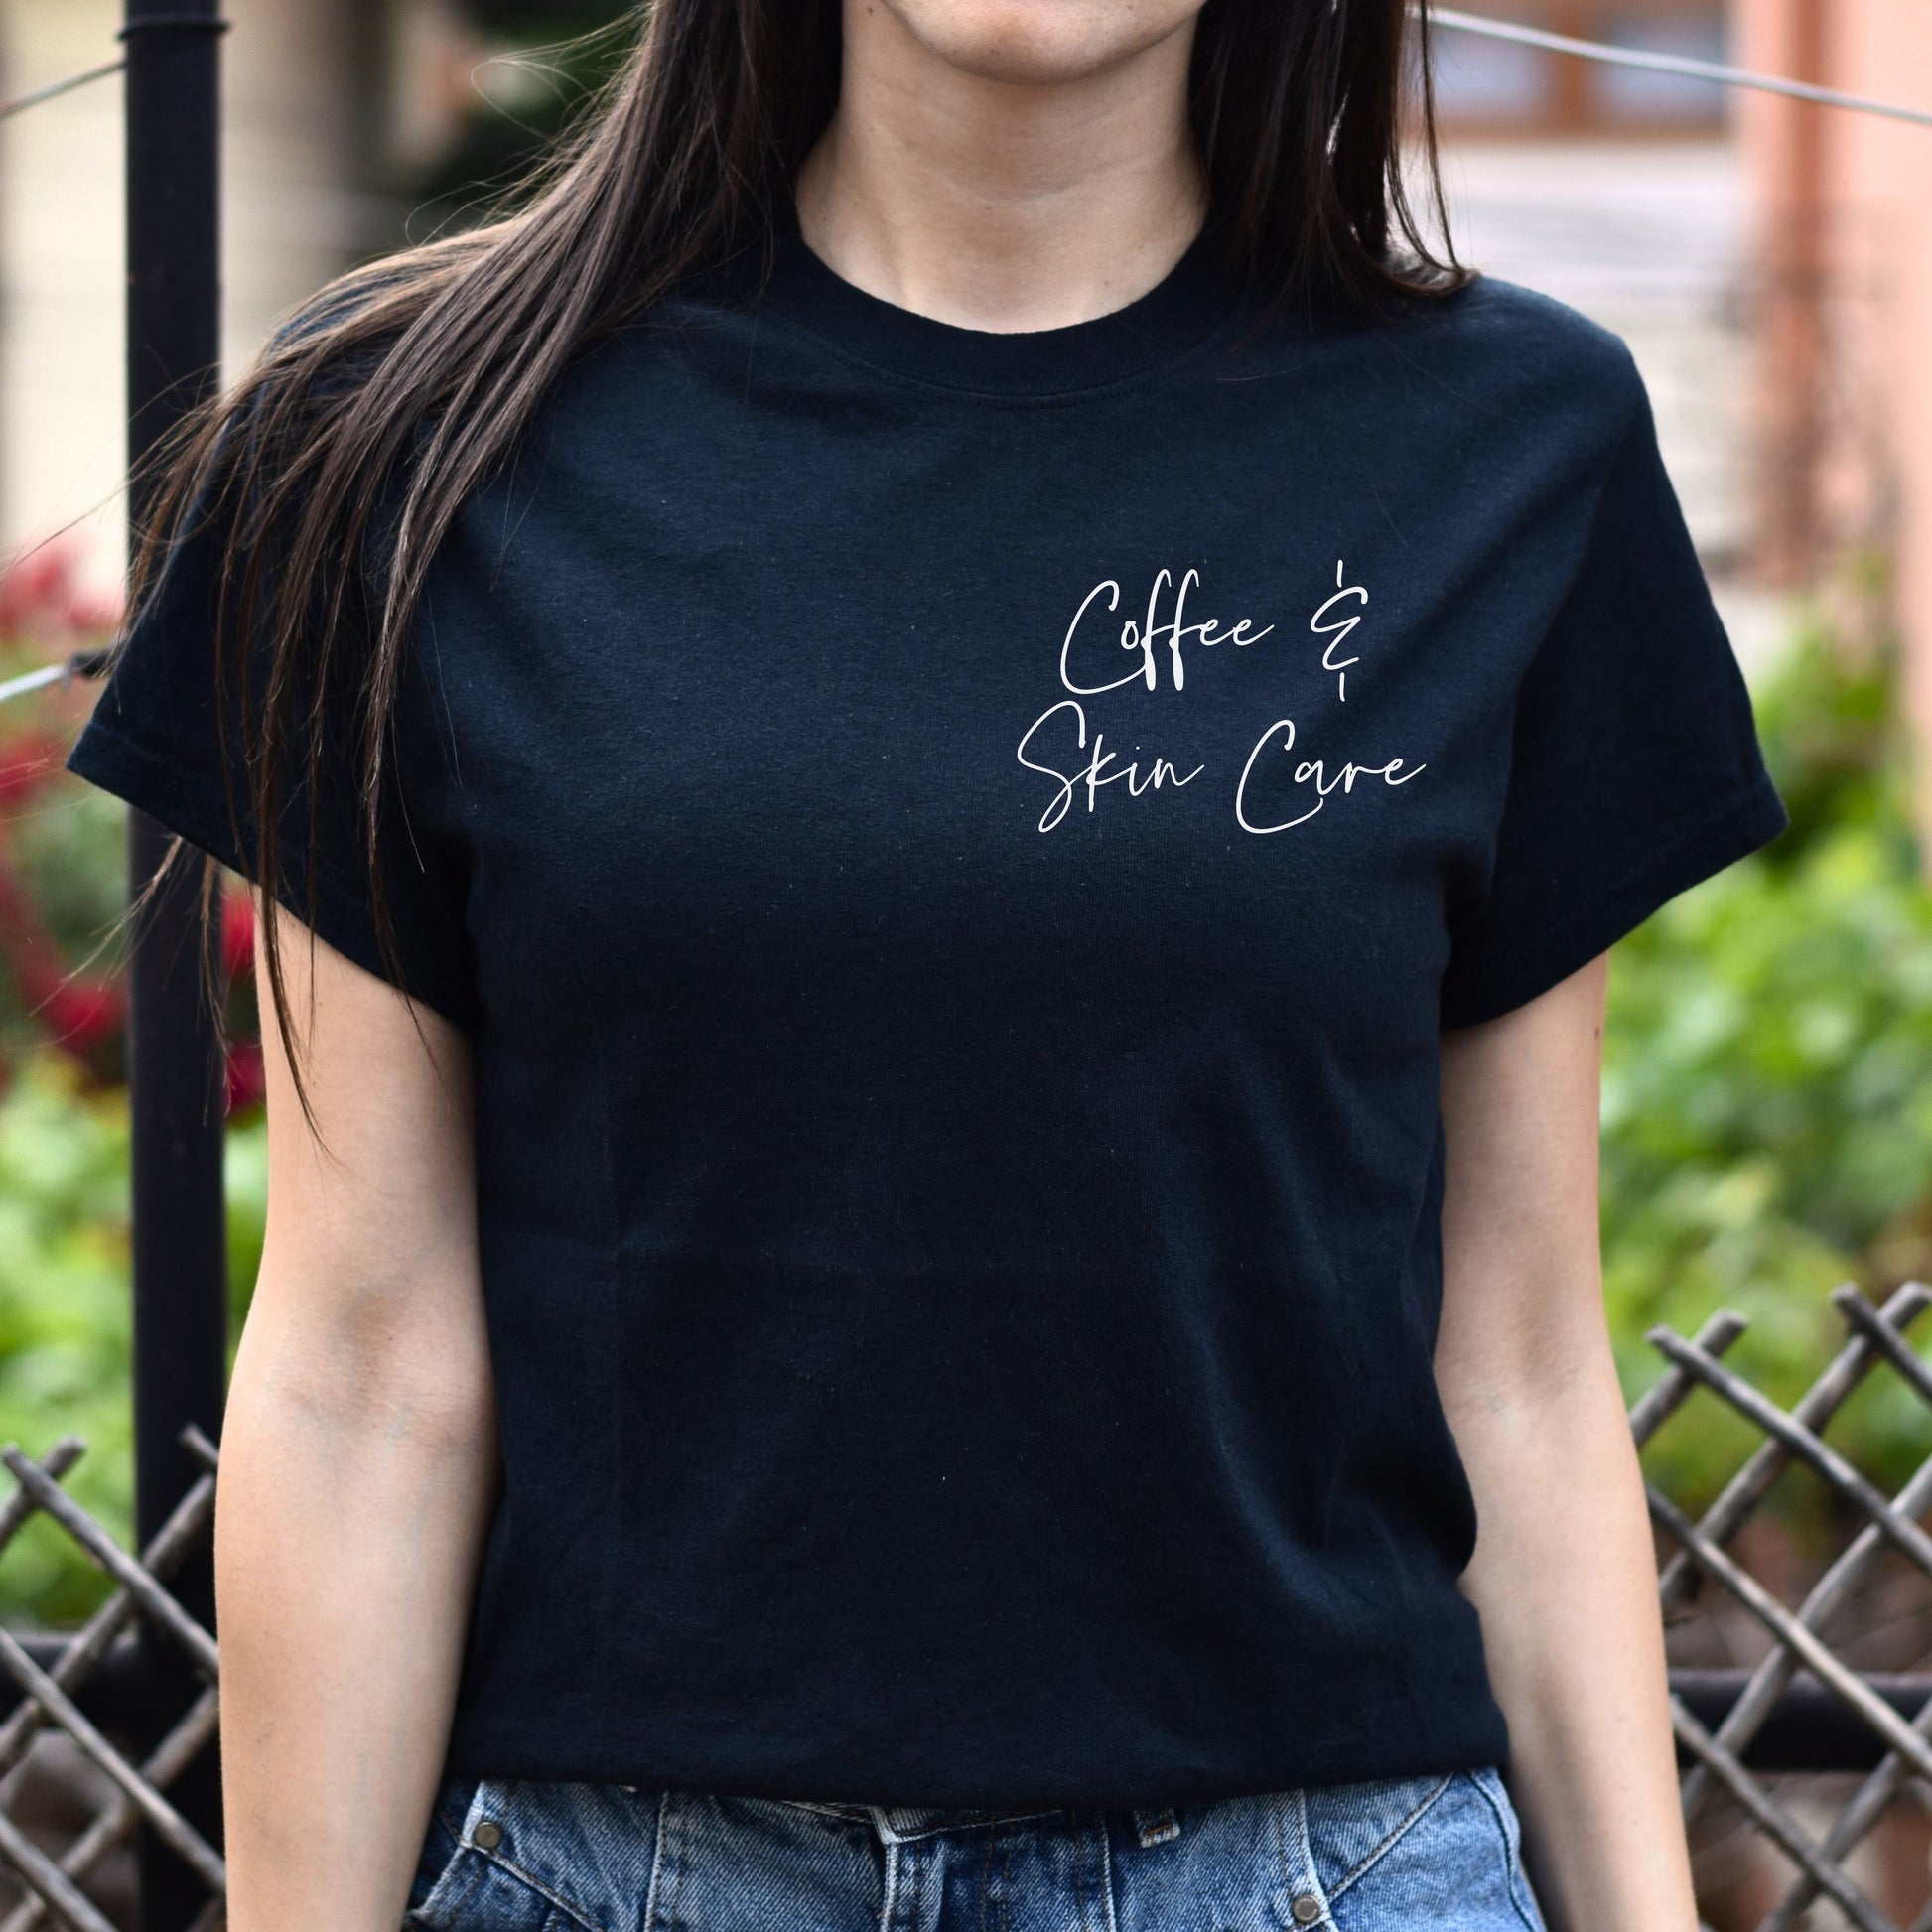 Coffee and skin care pocket Unisex T-shirt Esthetician tee Black Navy Dark Heather-Family-Gift-Planet